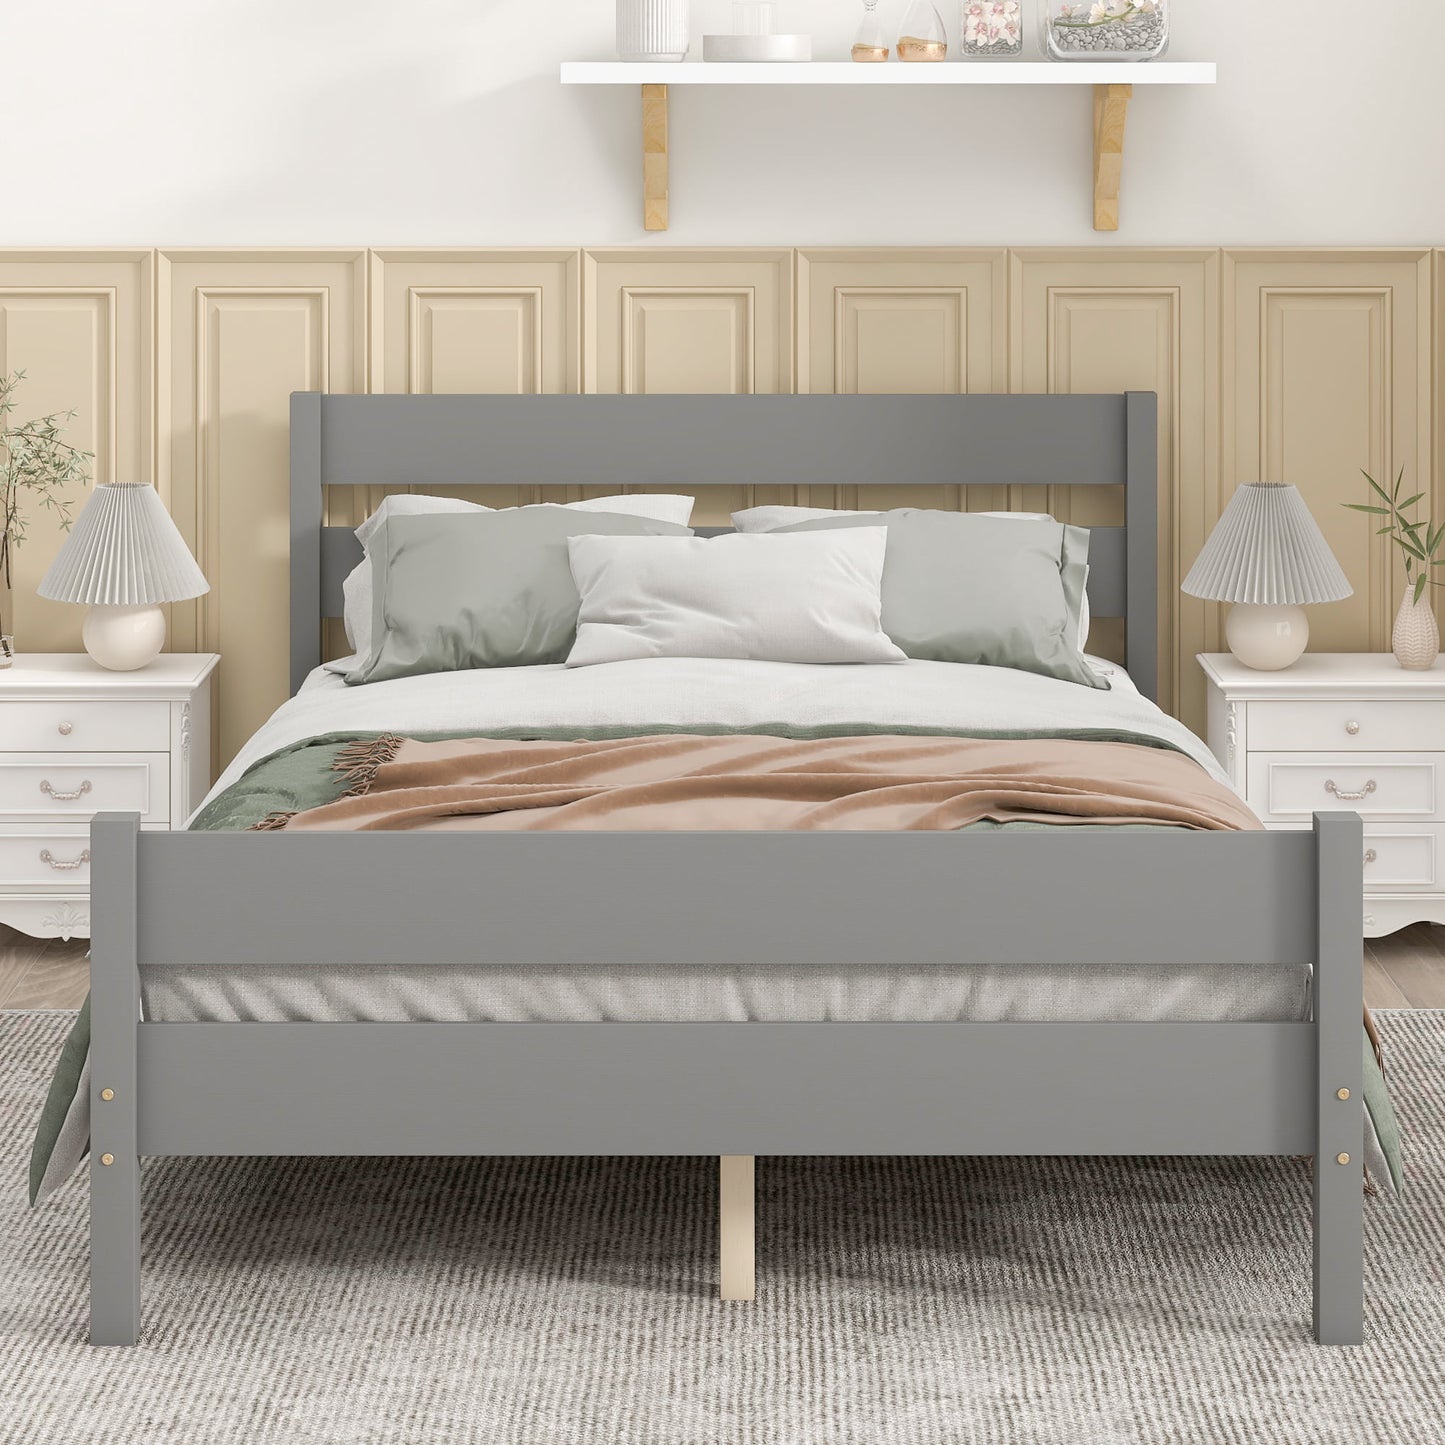 Wood Full Platform Bed Frame with Headboard and Footboard for Kids Boys Girls Teens Adults, Gray, LJ798